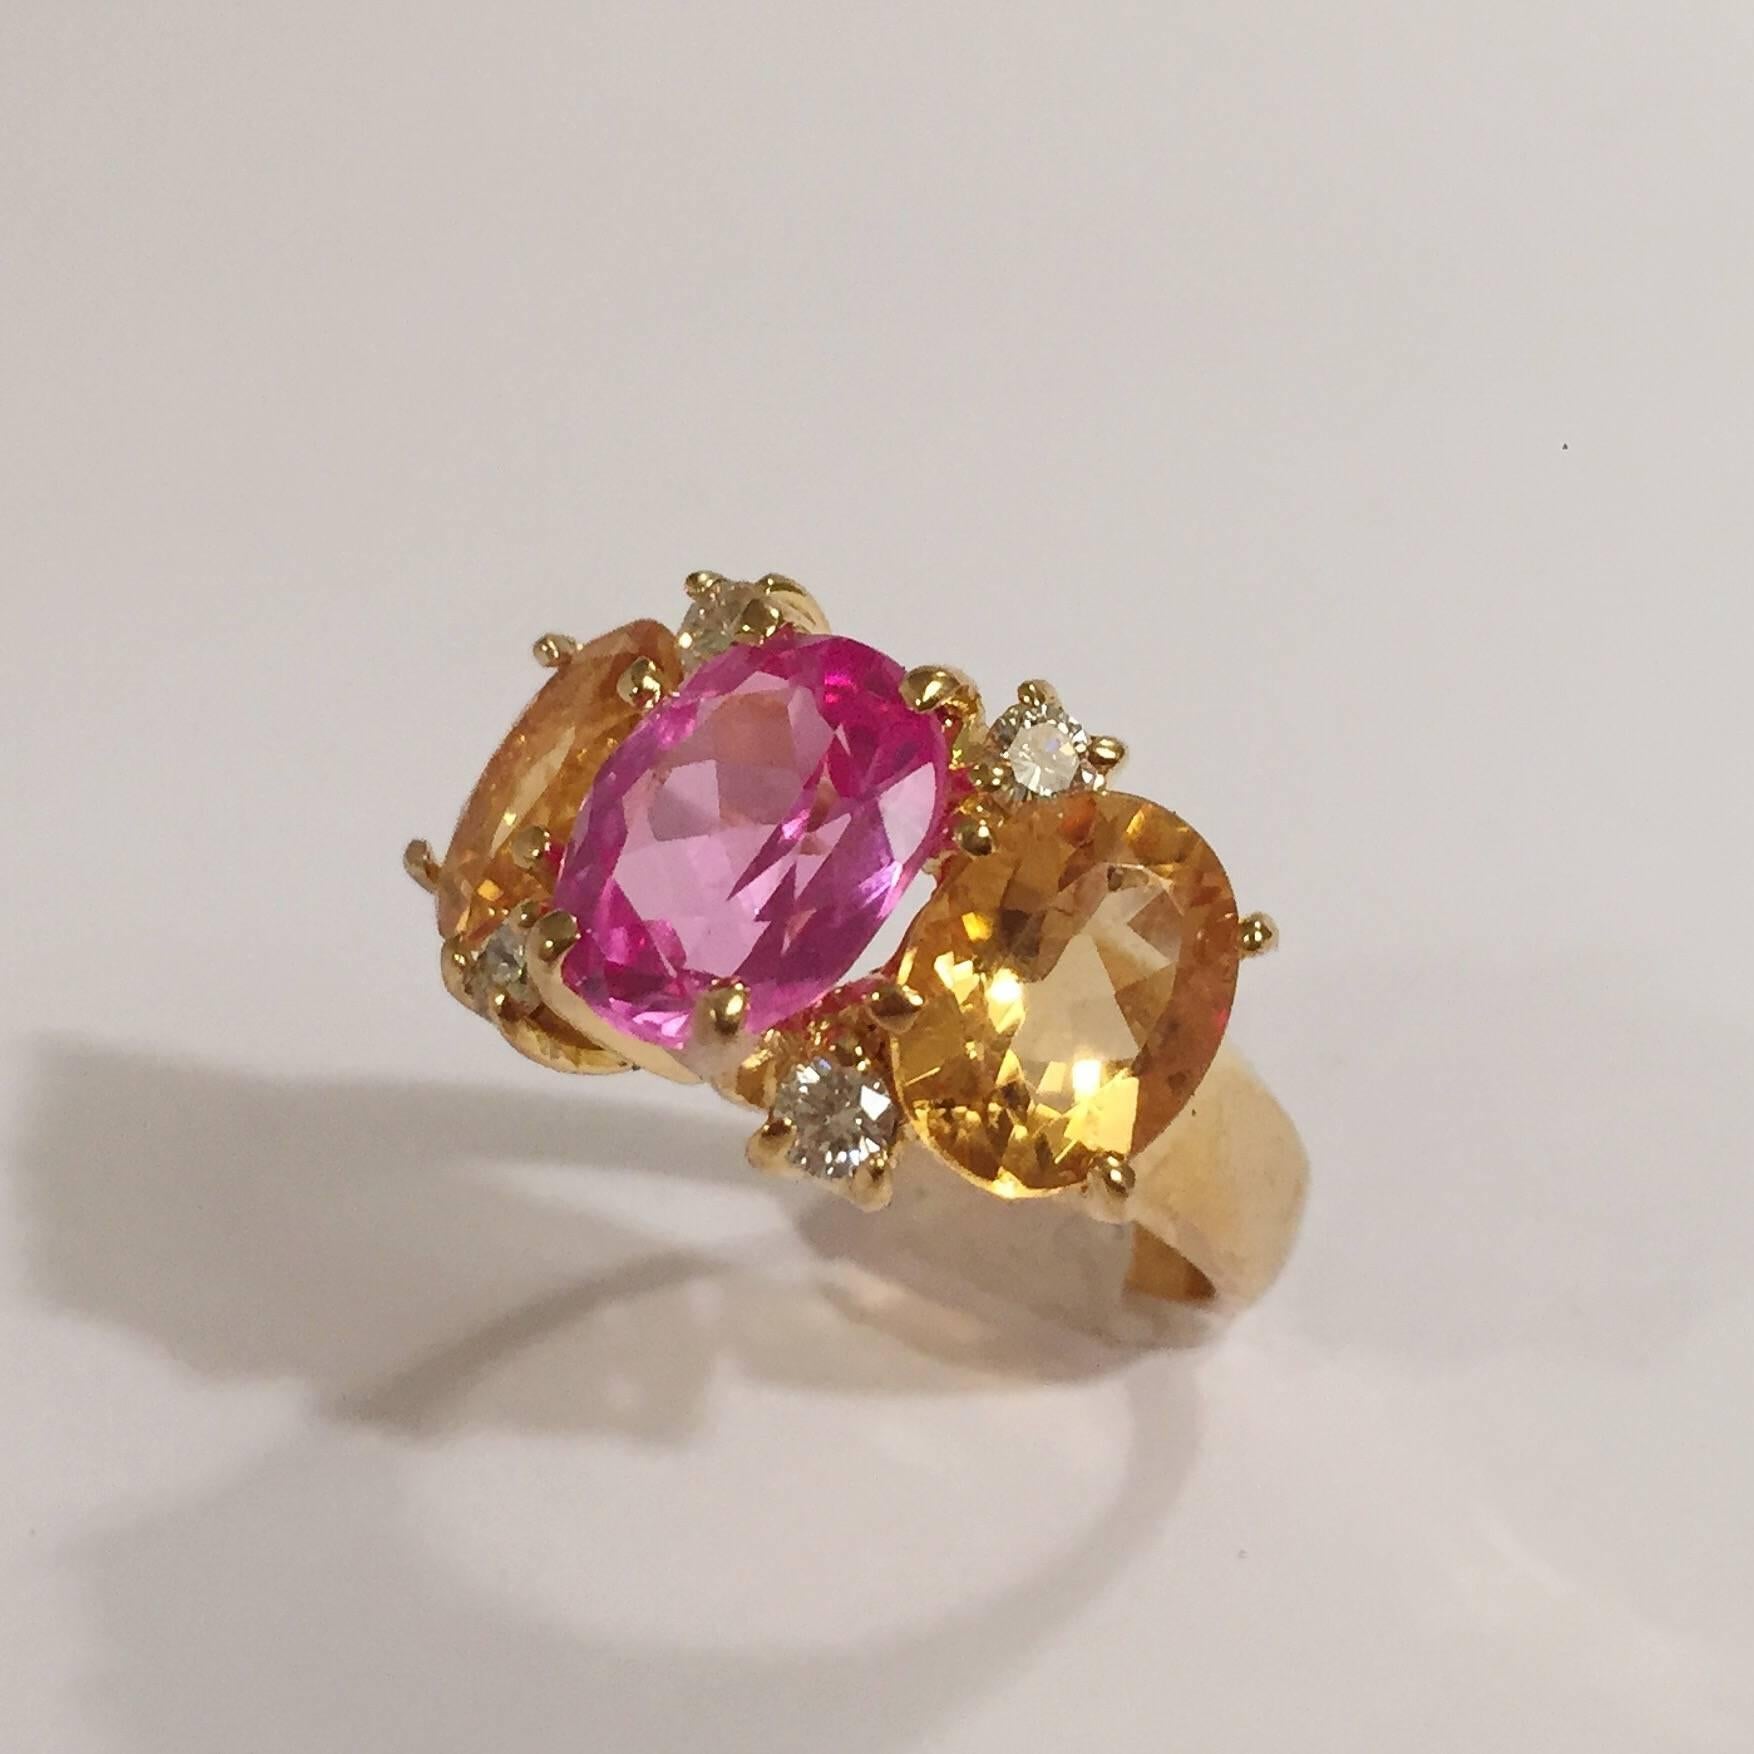 18kt White Gold Mini Three Stone GUM DROP™ Ring with Pink Topaz and Light Citrine and diamonds ~0.40cts  A big bang in a small package!  The ring measures 7/8" across the curved top and 3/4"from end stone to end stone.  

The ring can be